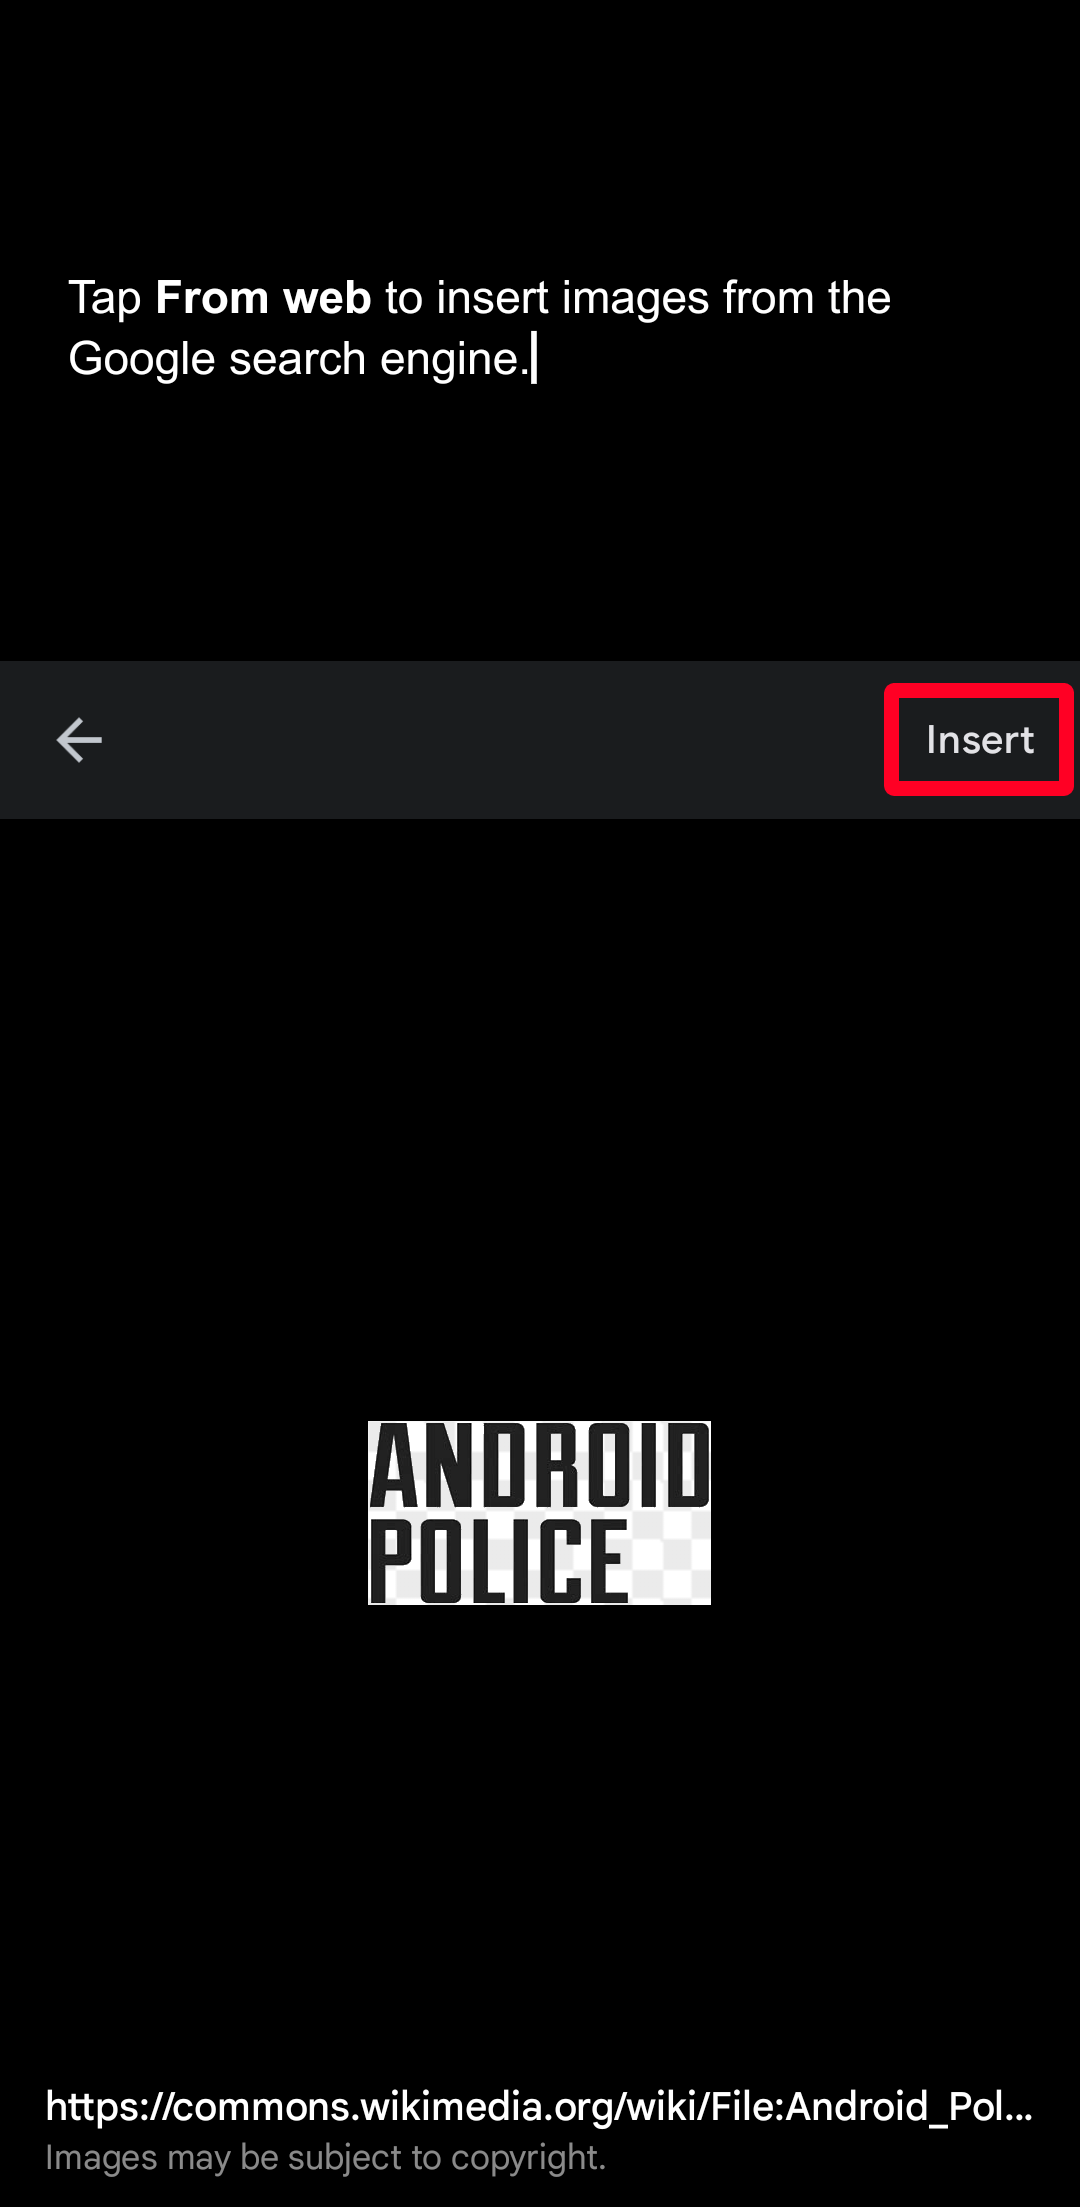 Preview of Android Police image search in Google Docs mobile app